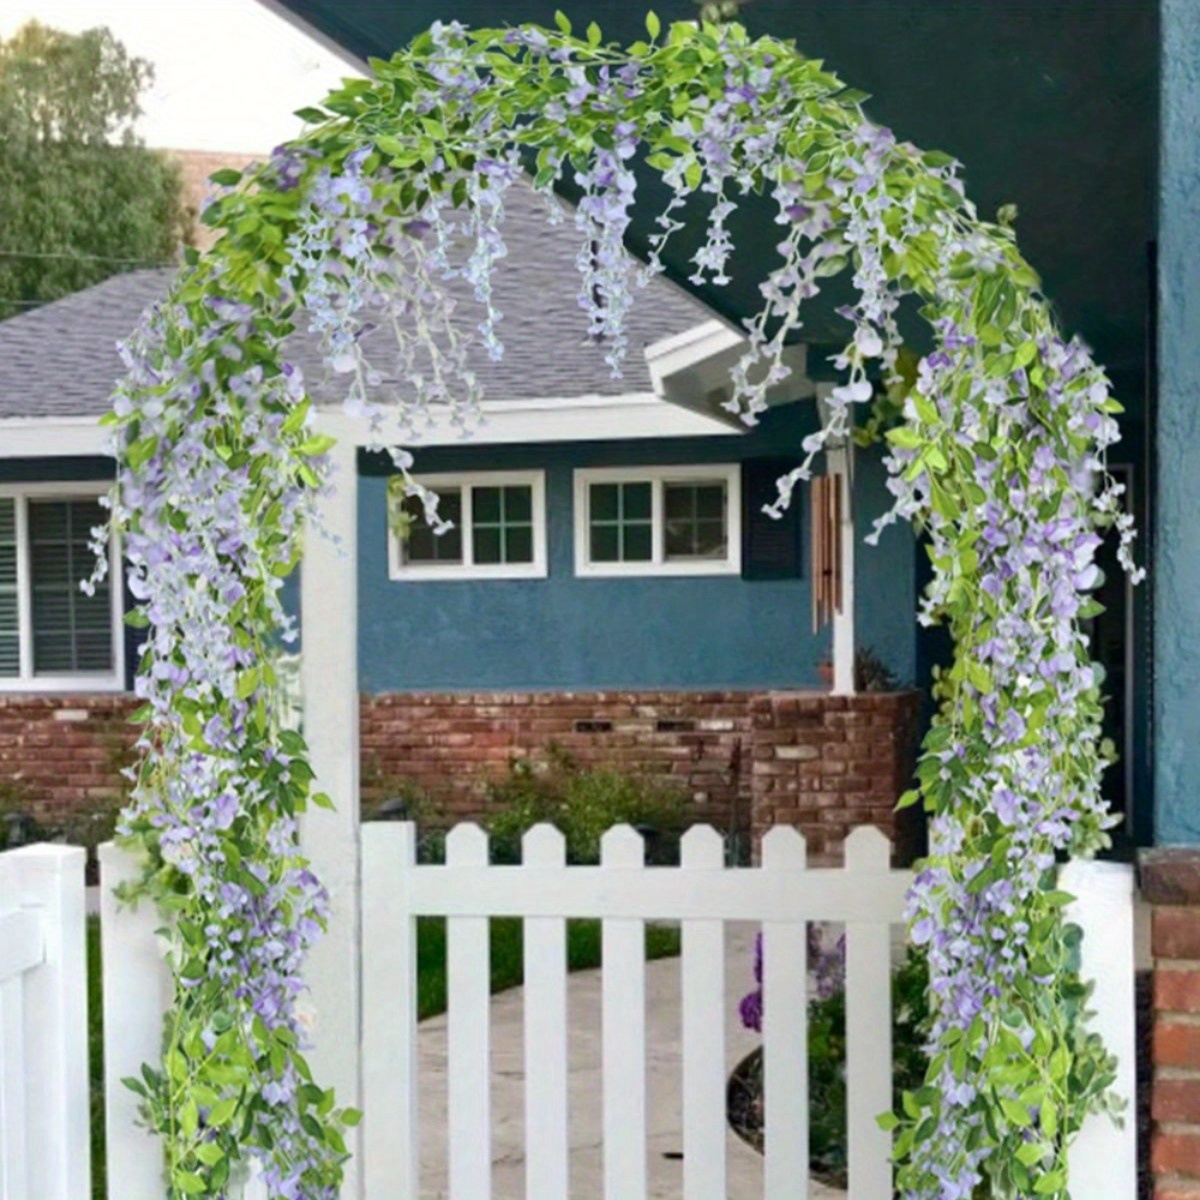 

2 Pcs 5.9ft Artificial Flowers Wisteria Garland Artificial Wisteria Vine Hanging Flower Greenery Garland For Home Garden Outdoor Wedding Arch Floral Decor For Wedding Decoration, Valentine's Day Decor